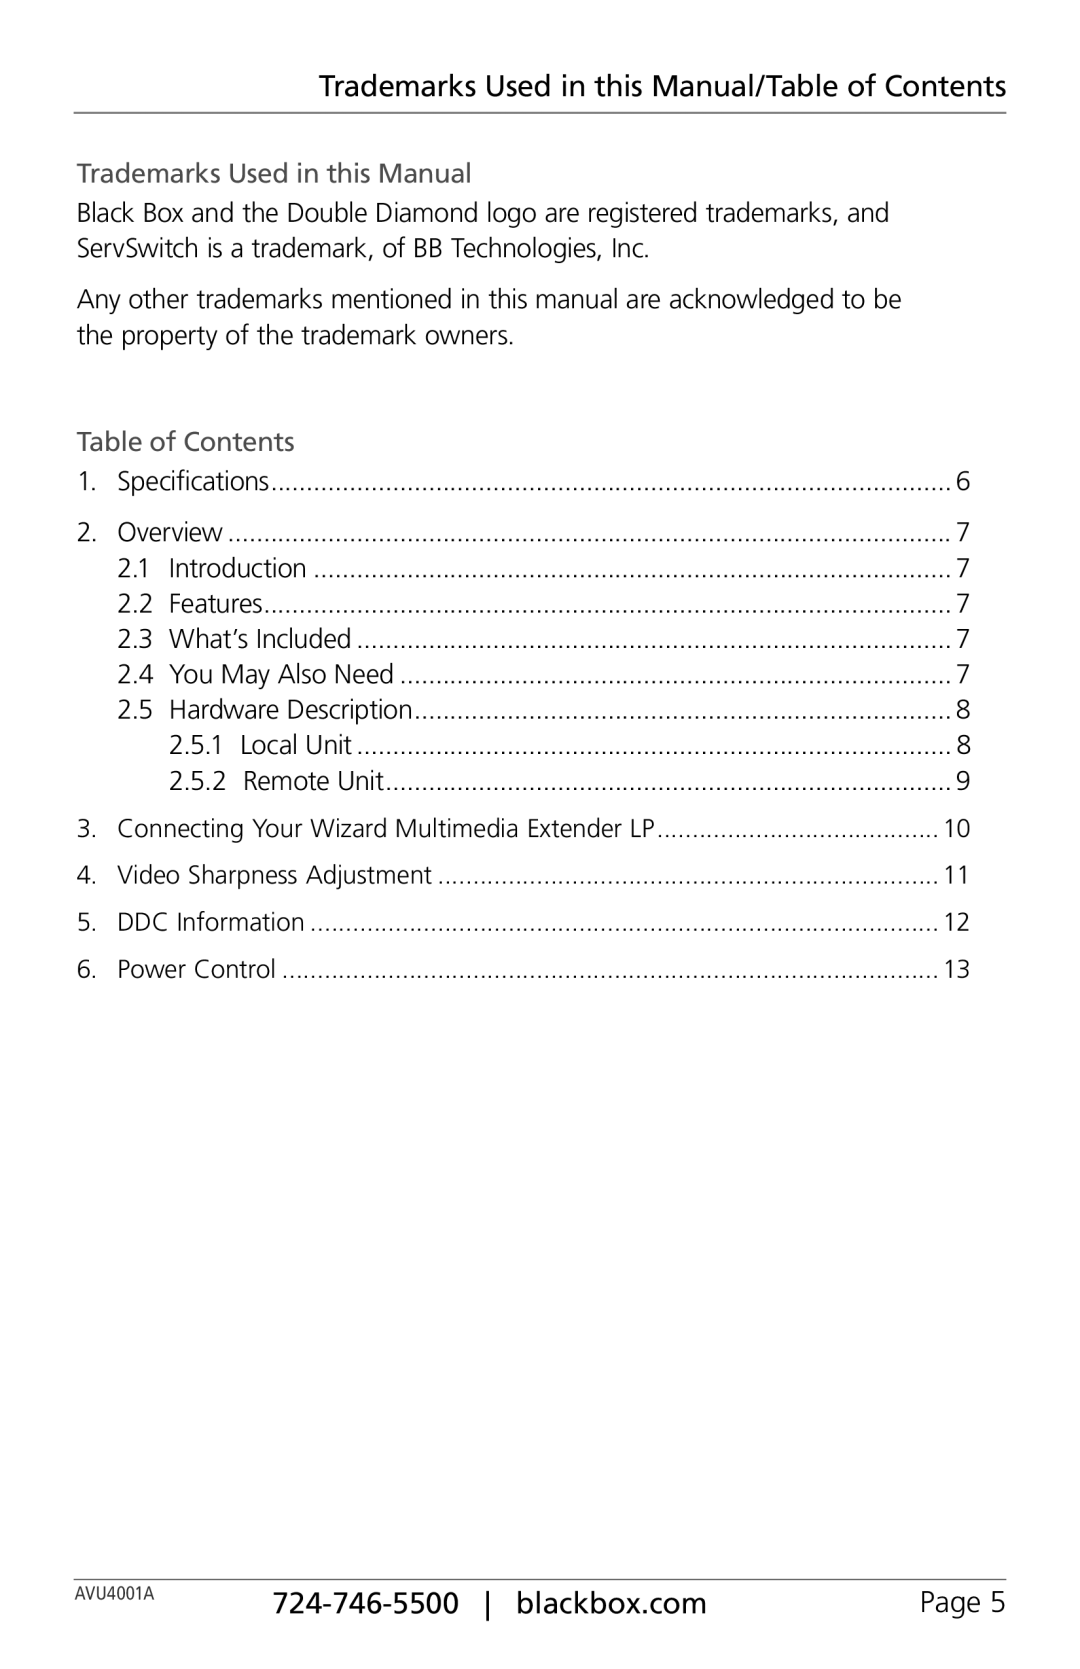 Black Box wizard multimedia extender LP, AVU4001-PS, AVU4001A manual Trademarks Used in this Manual/Table of Contents 